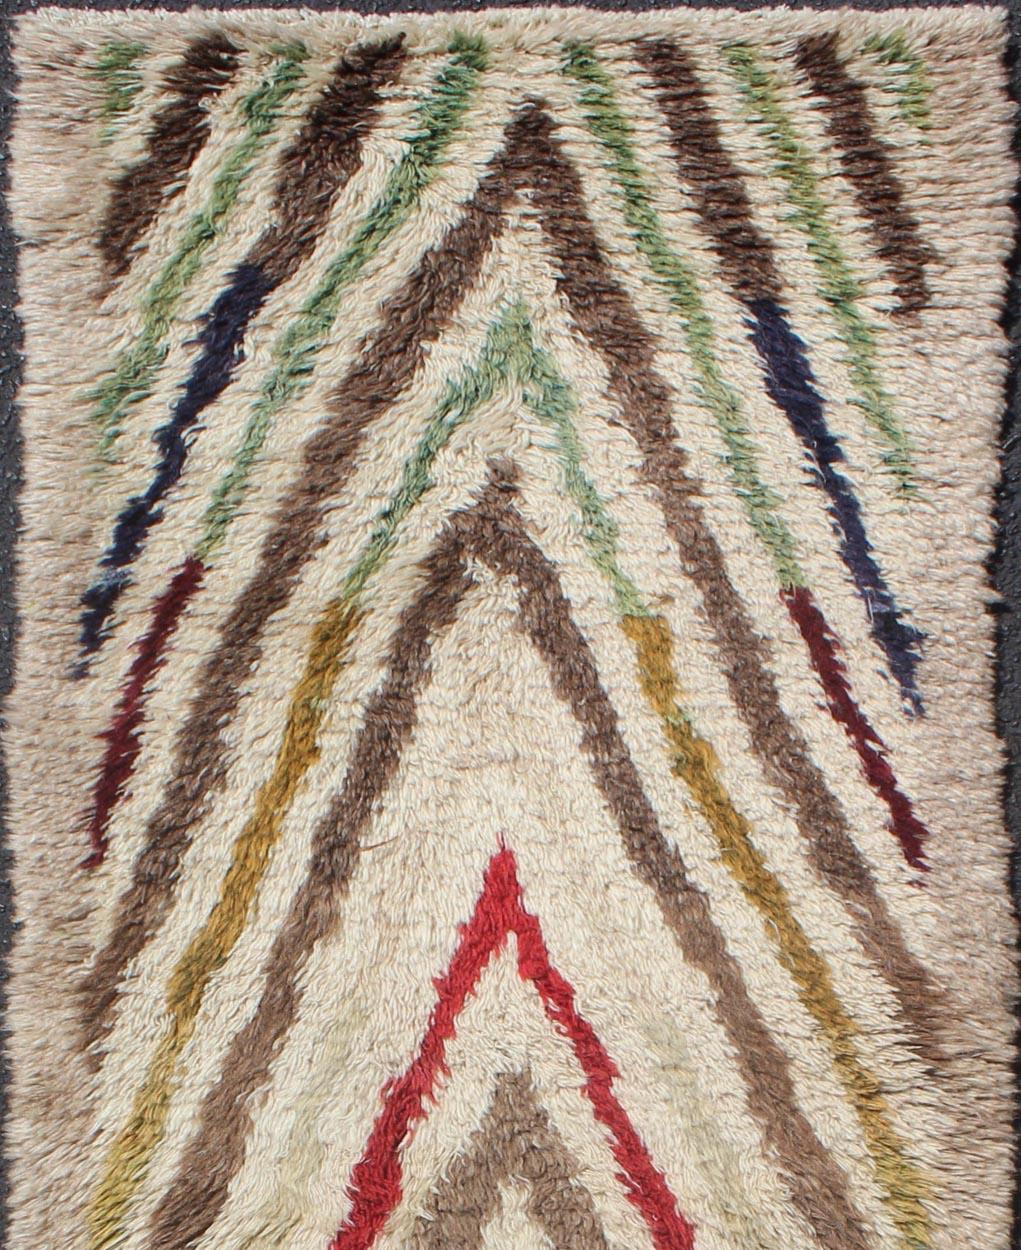 This Tulu runner contains a repeating arrow design laid across an off white field. Tulu rugs are woven in the Konya area with a very coarse weave and pile to accentuate the tribal pattern. The wool used in these rugs is exceptionally fine and